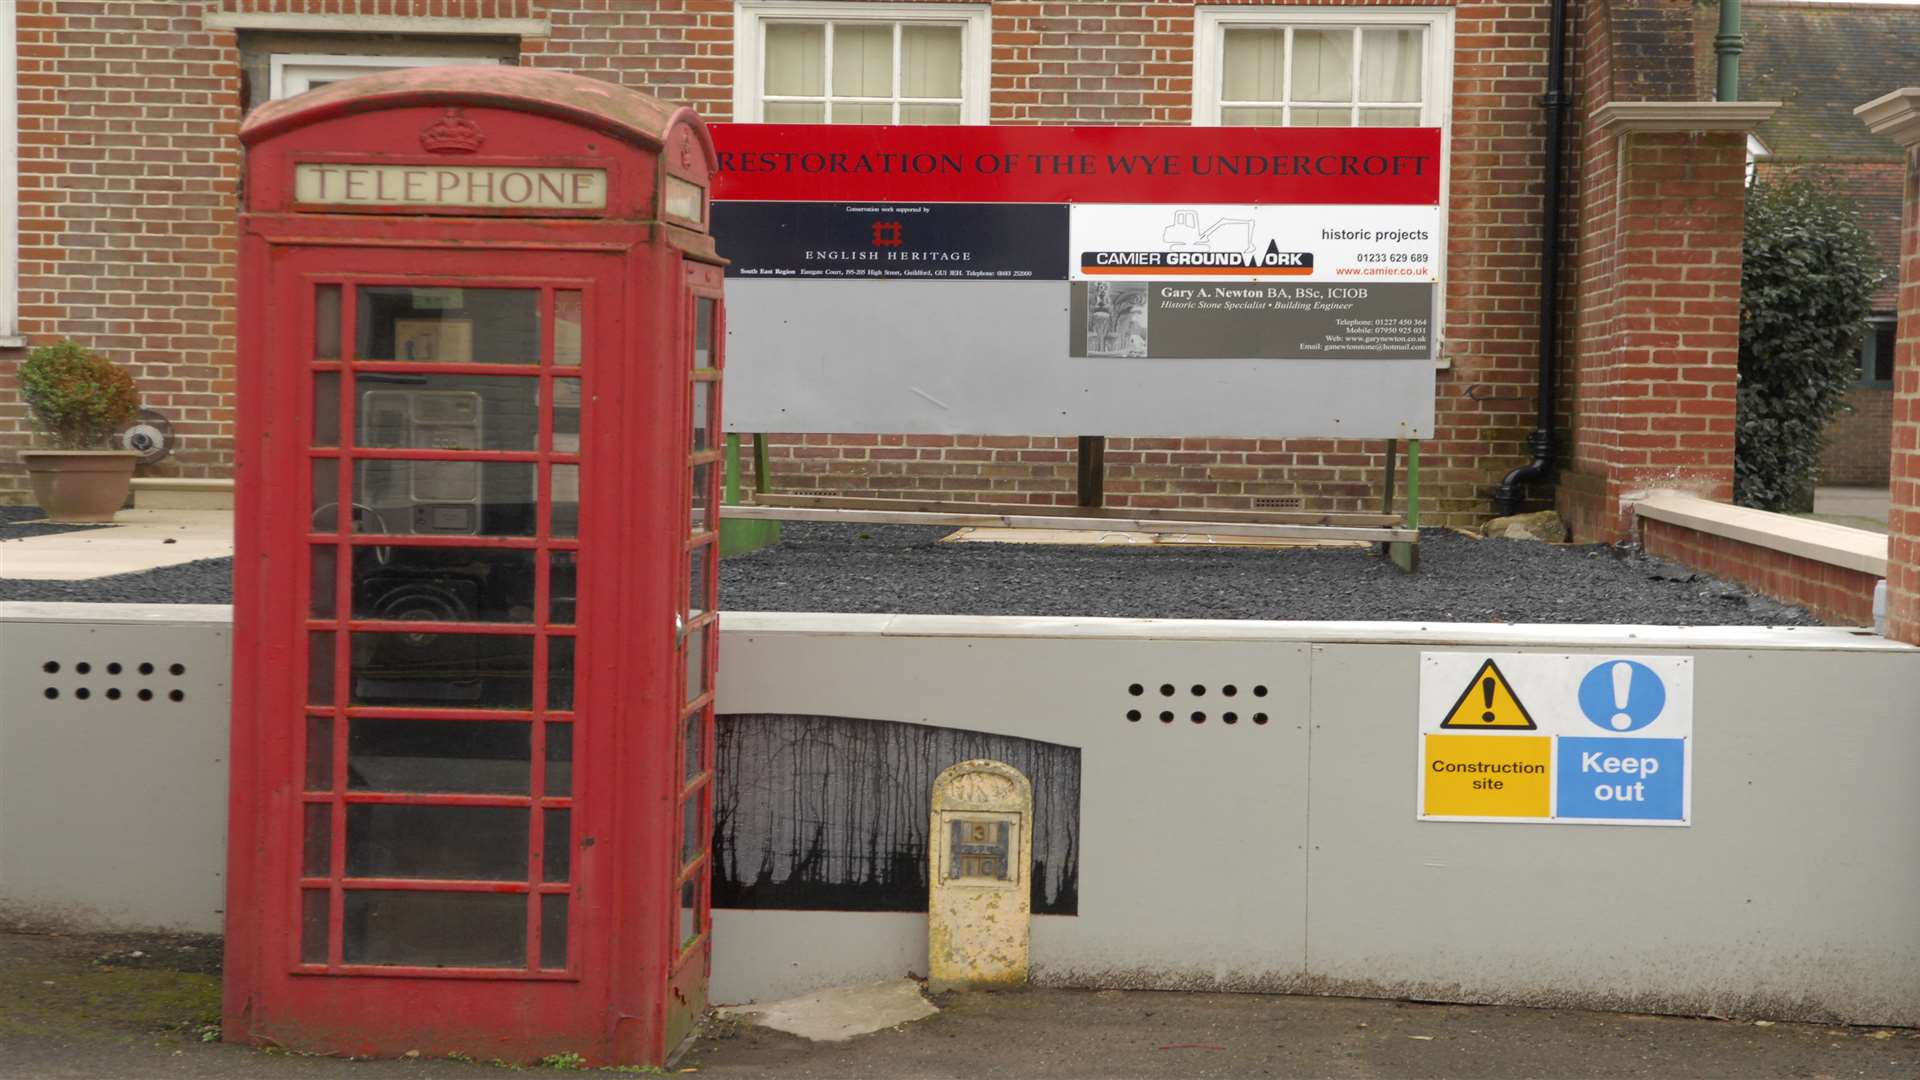 BT have proposed to remove phone boxes county wide